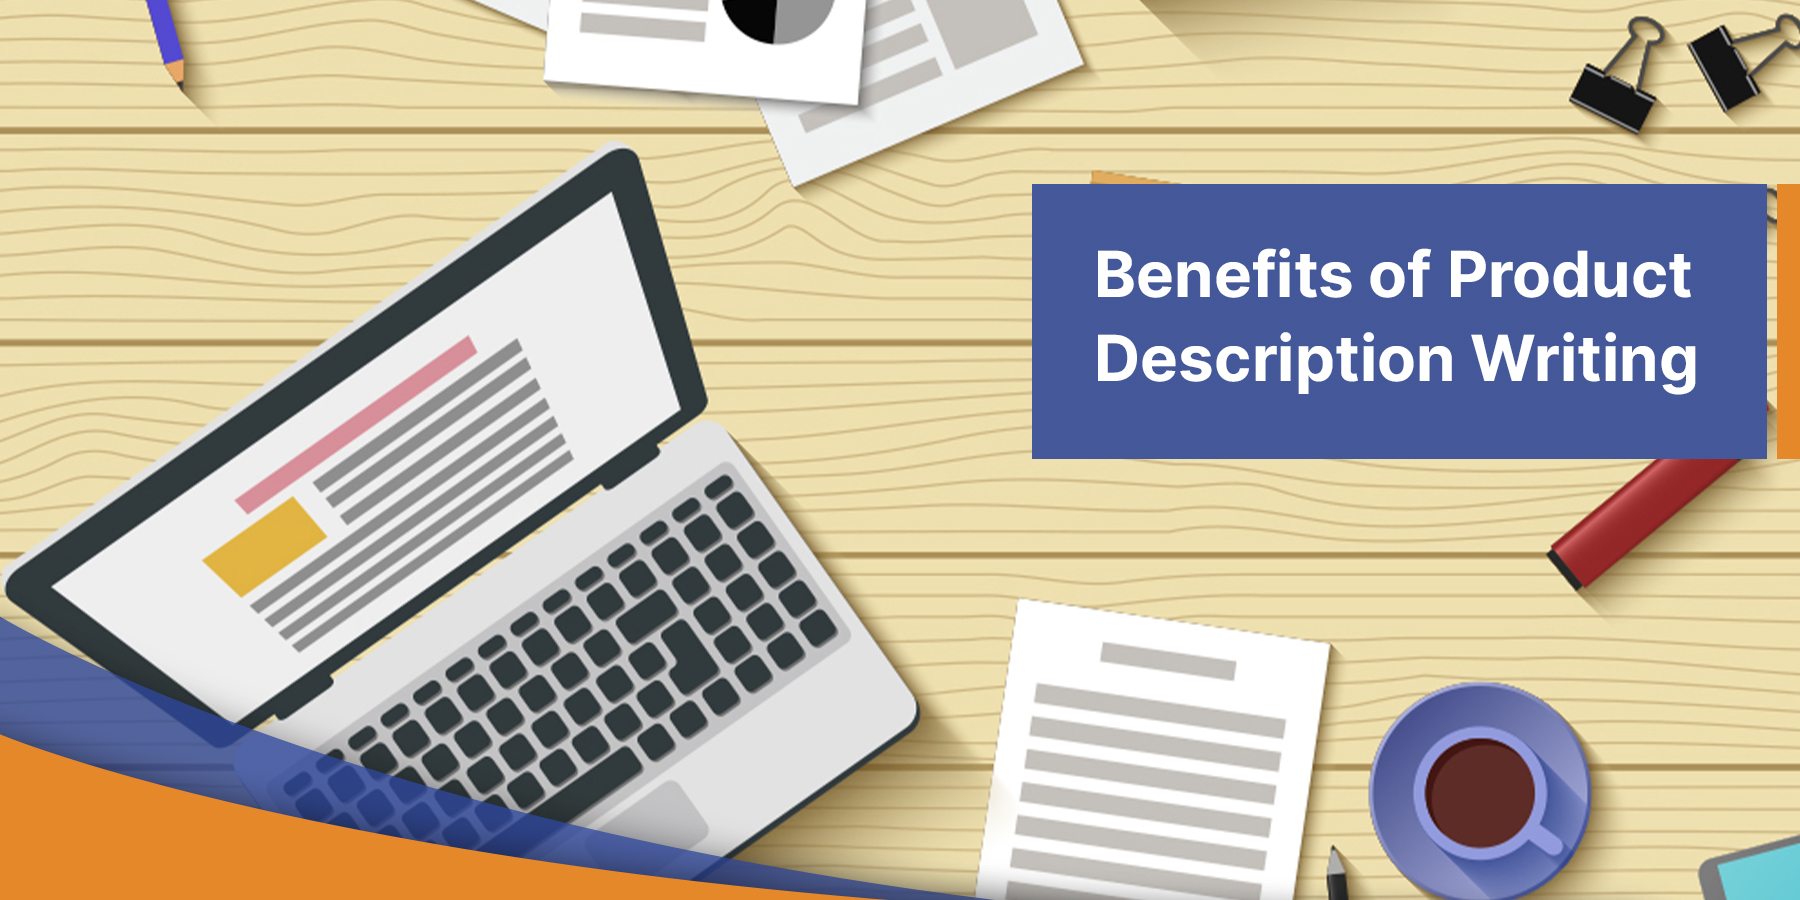 Benefits of Product Description Writing